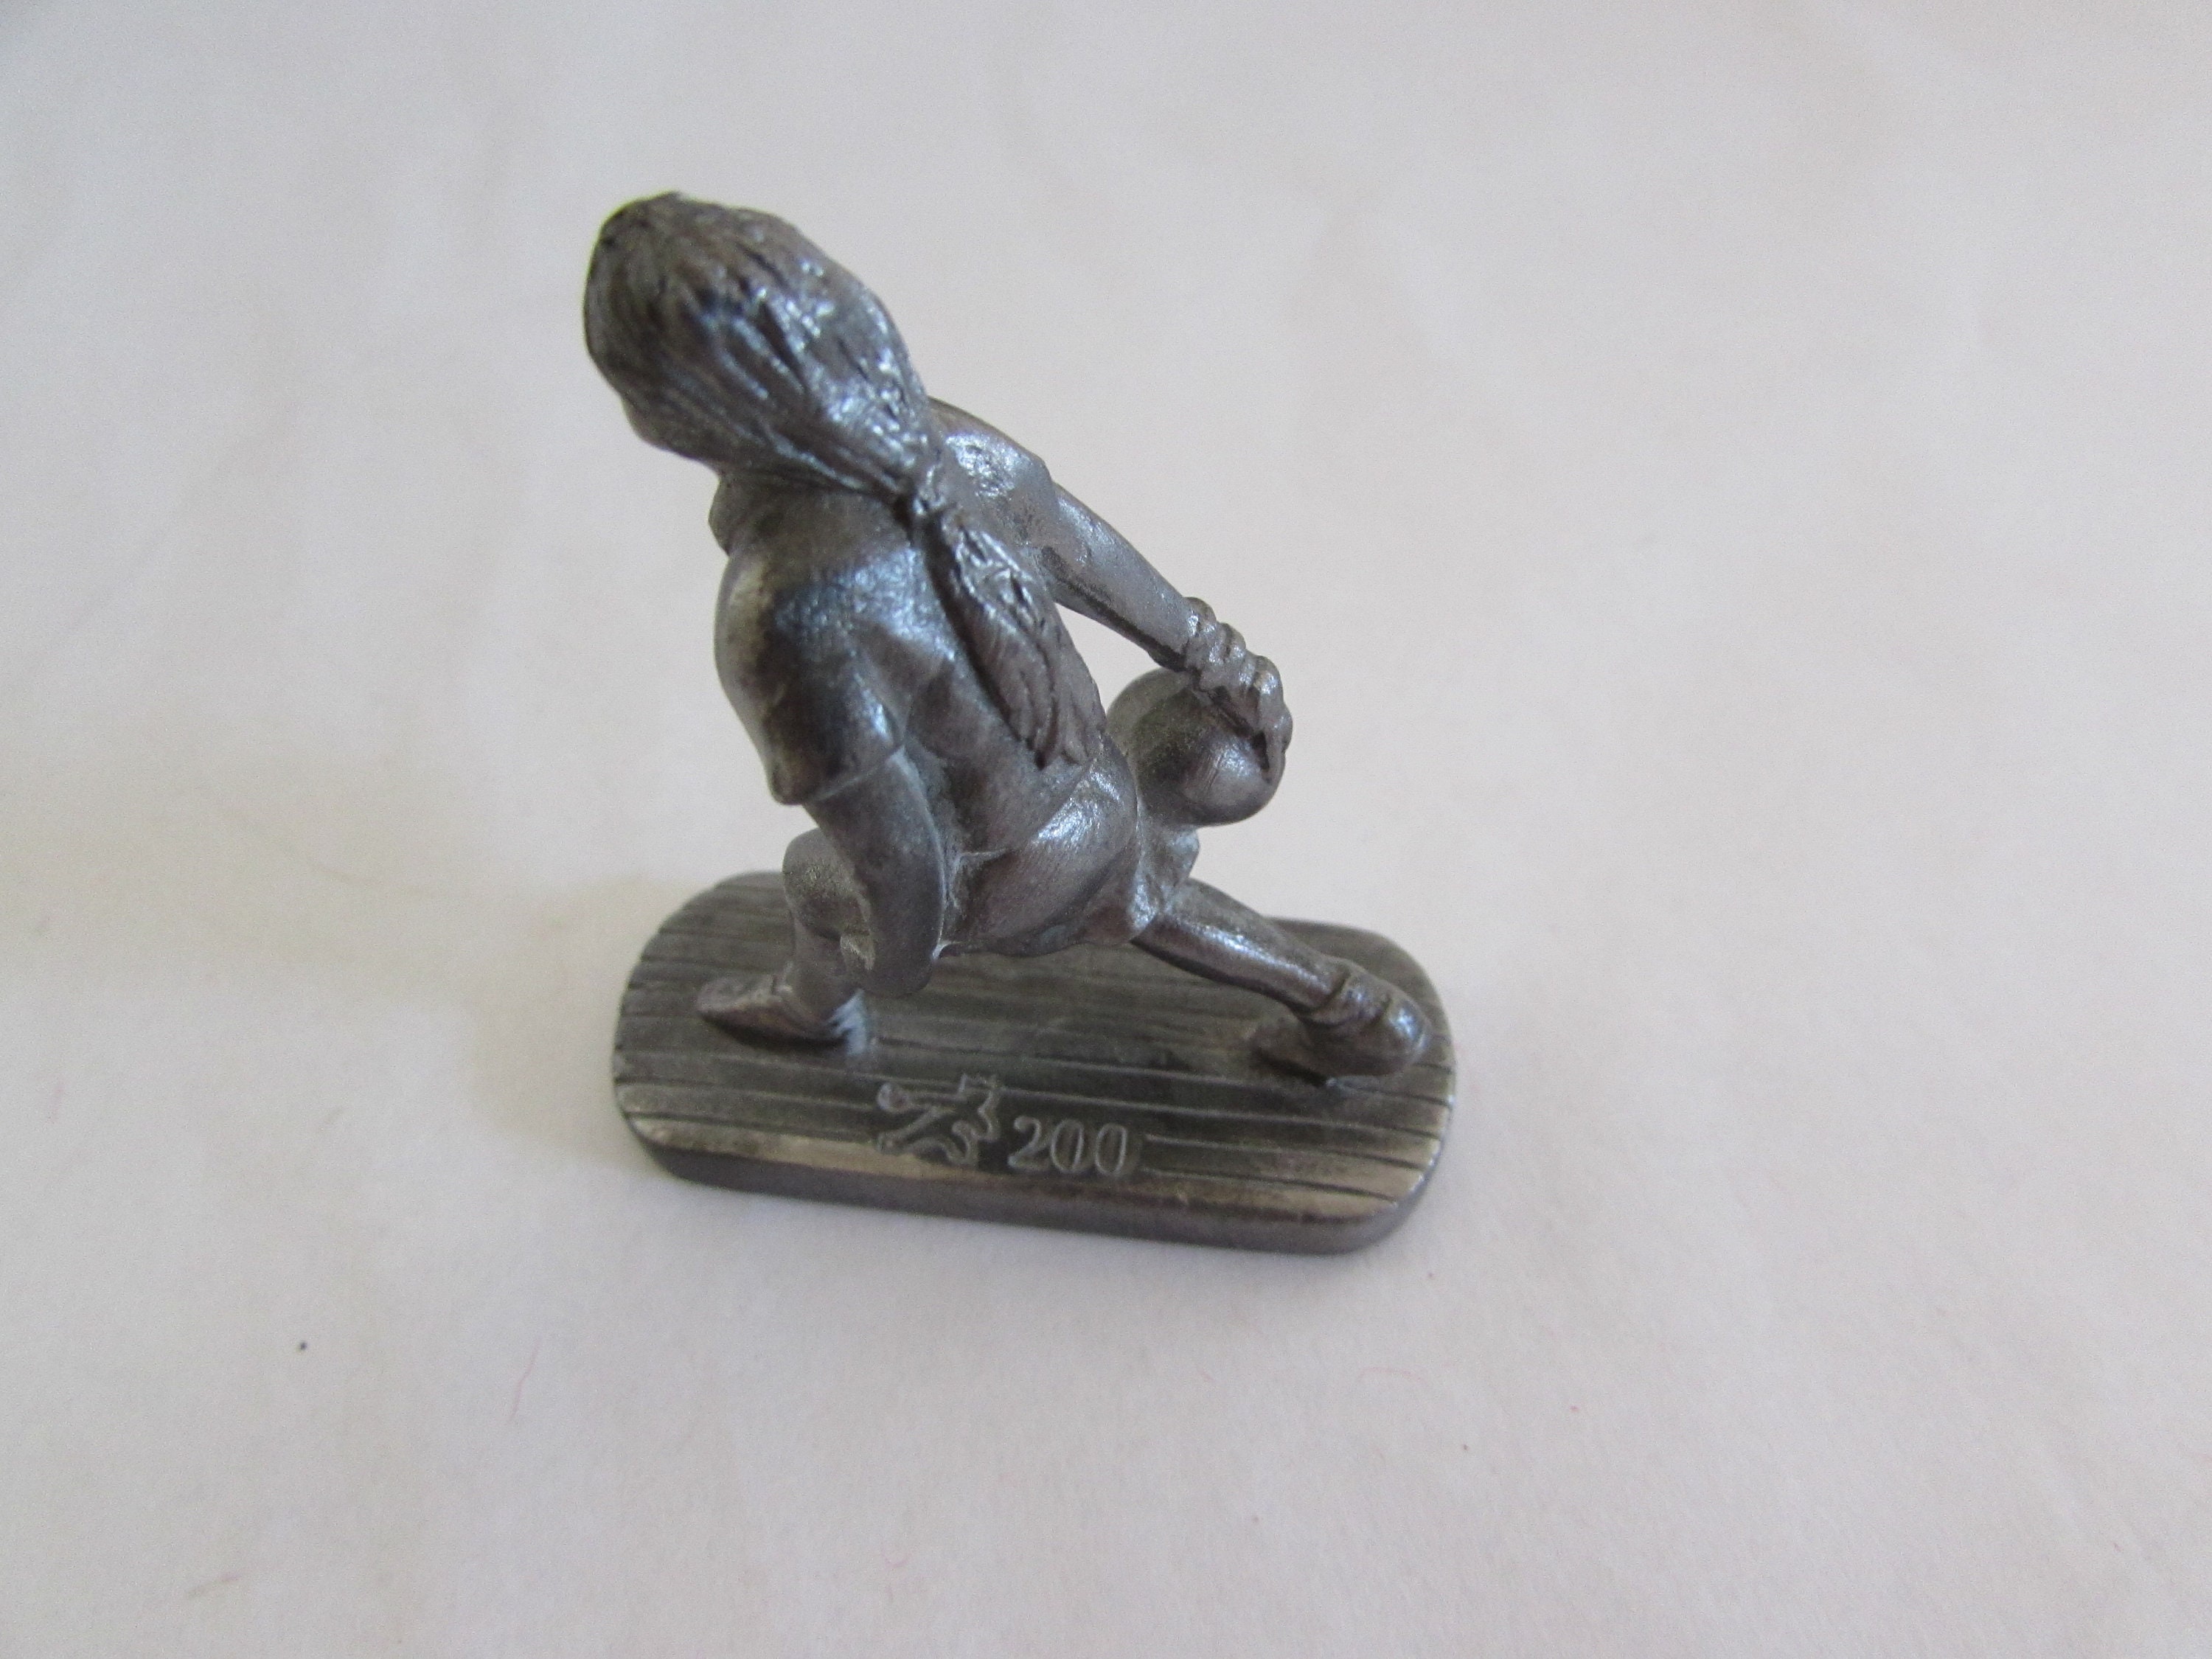 Interior Pewter Decor Ball Sports Girl playing Bowling Photo Prop ~ 20-01-290 Vintage Little Statuette Collection Figurine